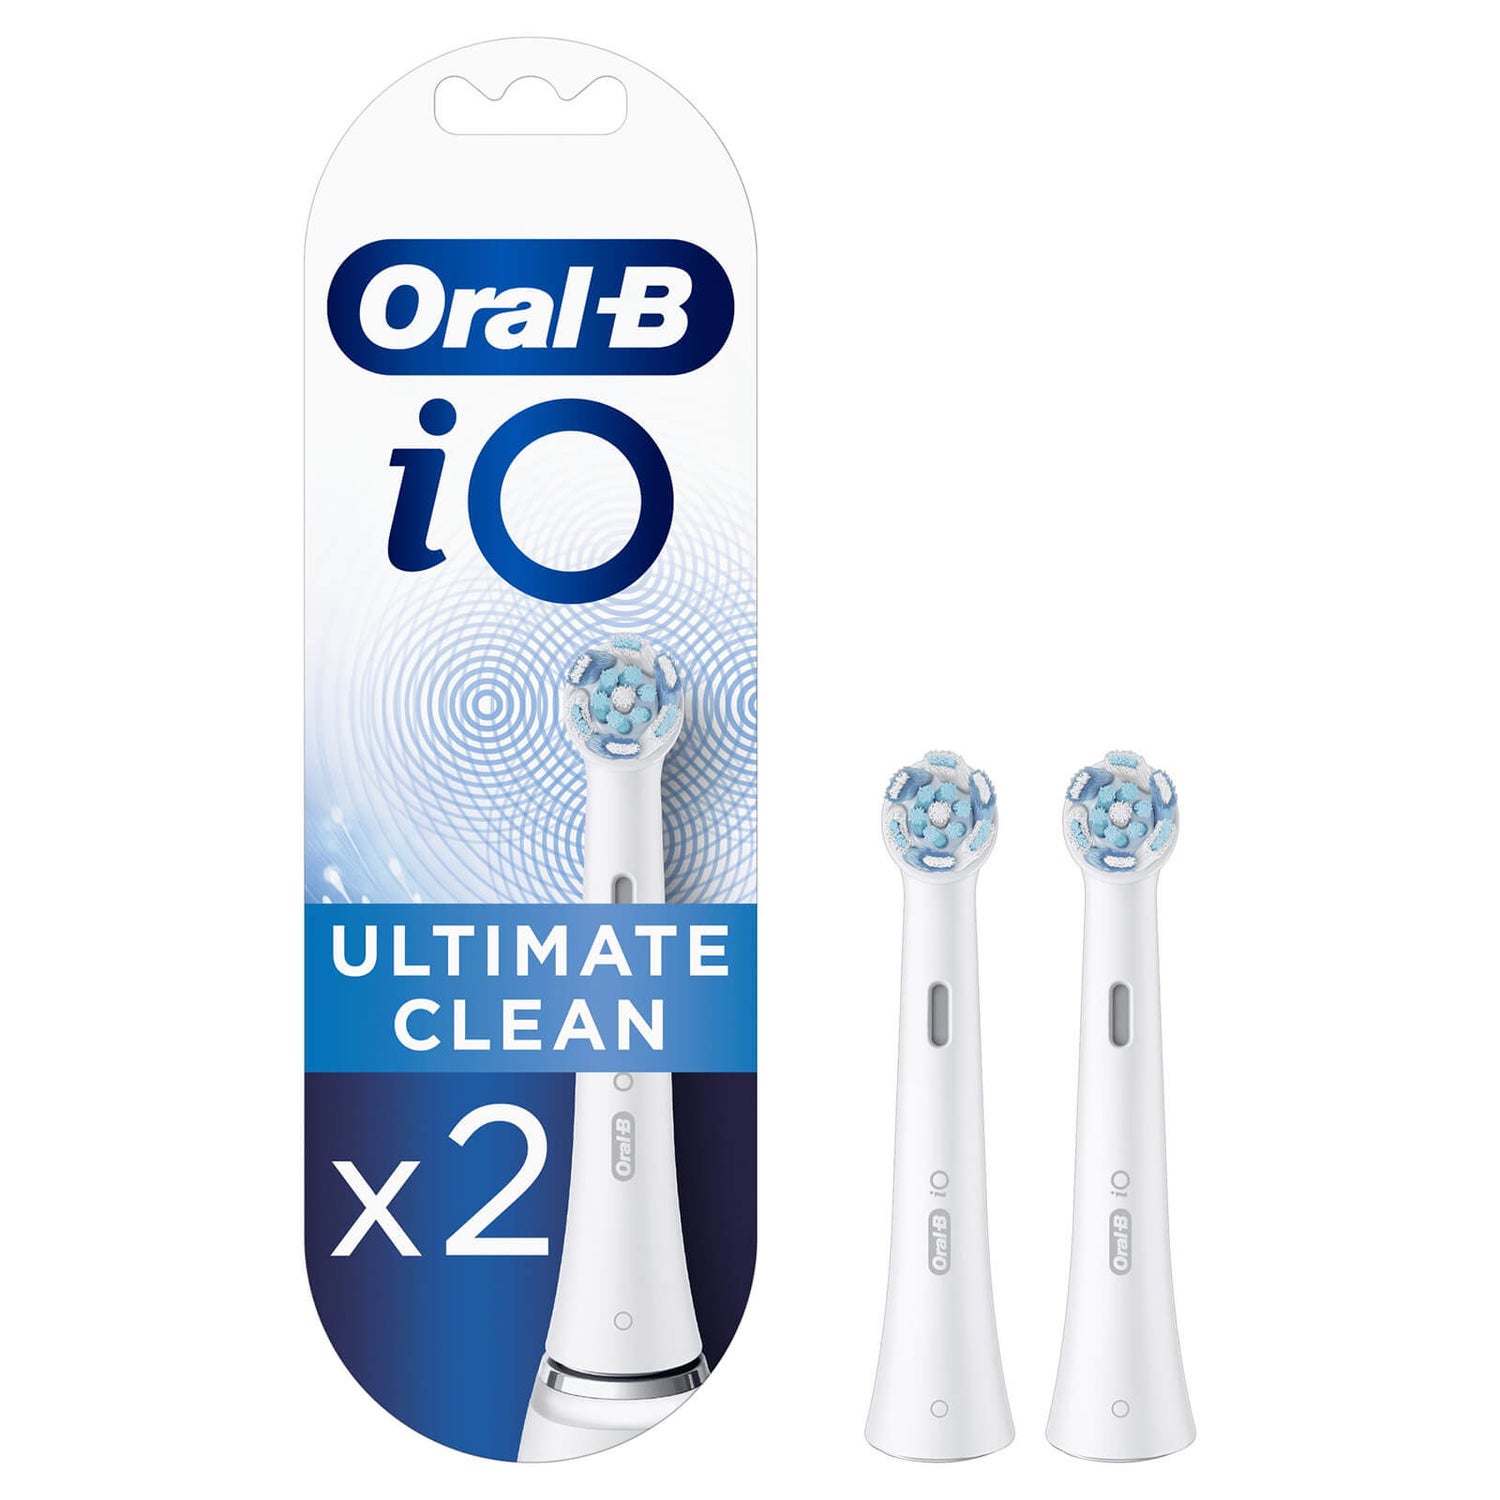 Oral B iO Ultimate Clean Toothbrush Heads - Pack of 2 Counts